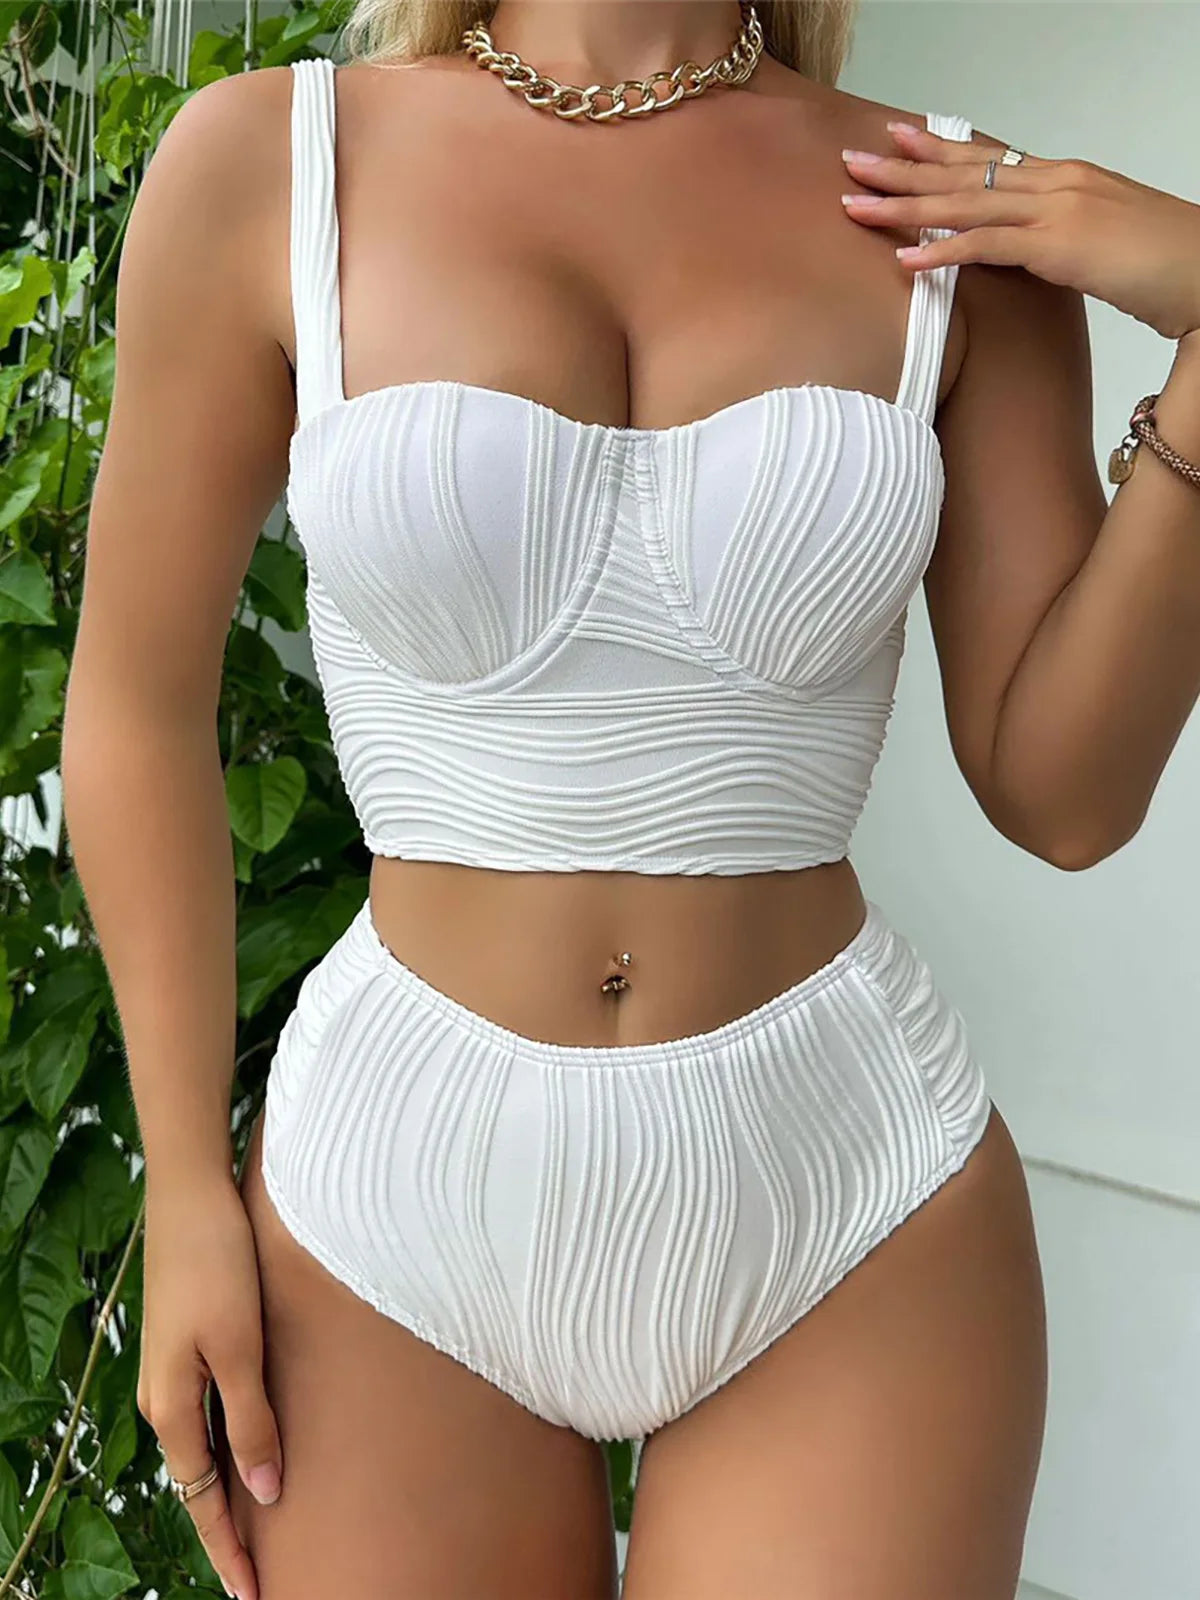 Wrinkled Underwired High Waist Bikini Set, Classic Two-Piece Swimwear, Made of Nylon and Spandex, Solid Pattern, Underwire Support, True to Size, Women's Bikini Set, Comes with Padding, Available in Sizes Small, Medium, Large, Colors Available: White, Beige, Black, Multicolor, Free Shipping.